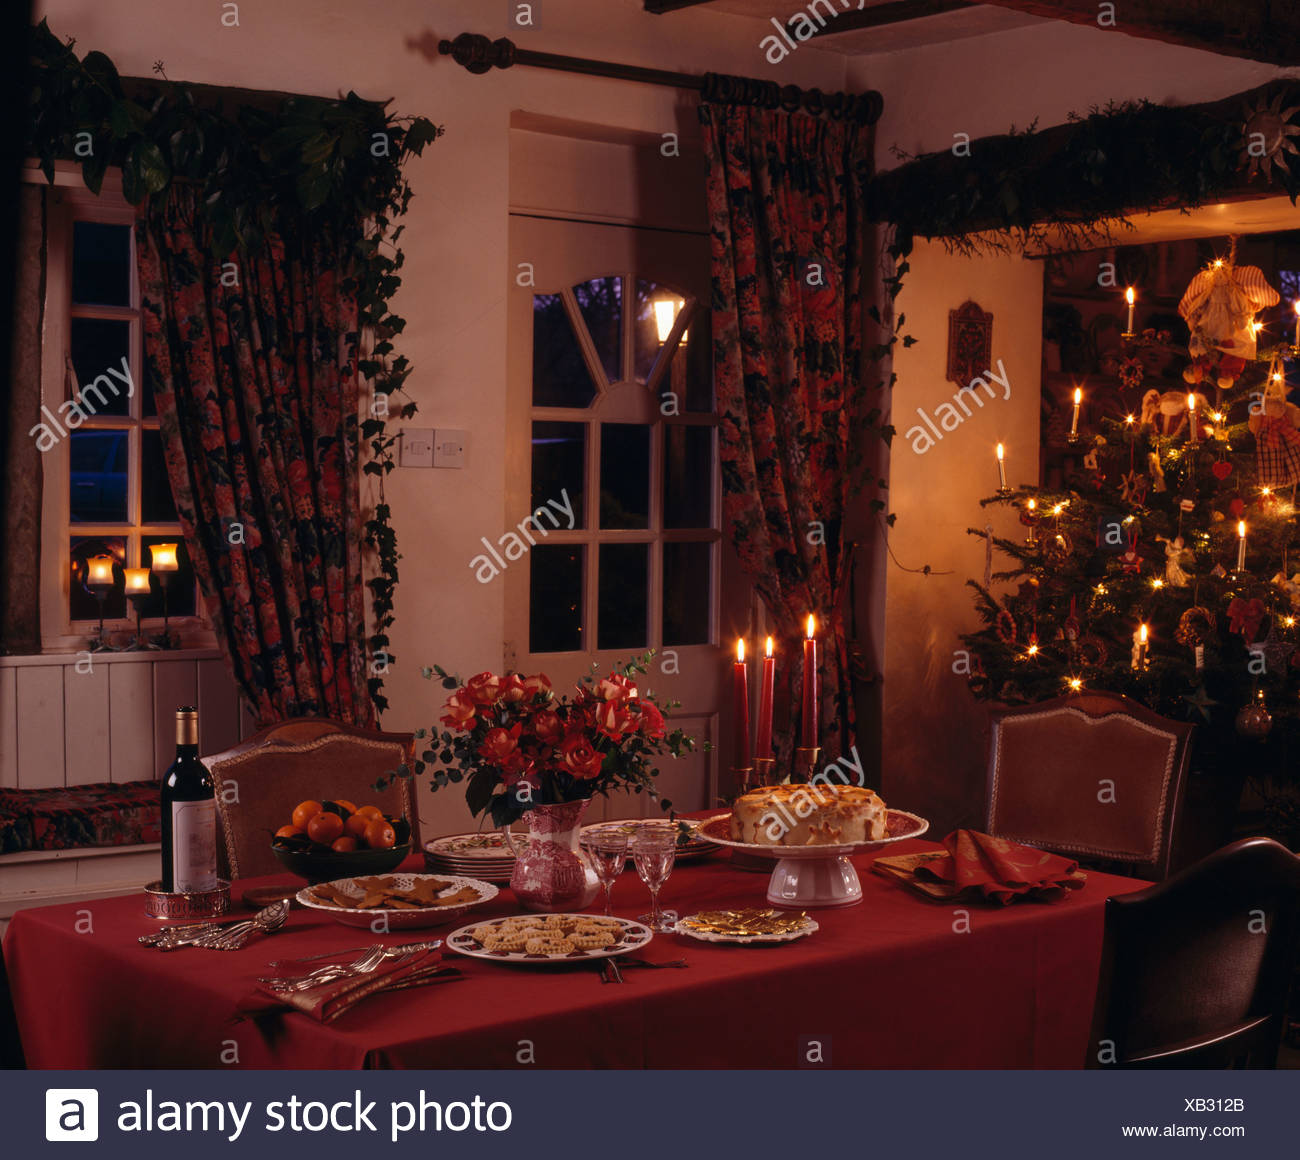 Red Cloth On Table Set For Christmas Tea With Lighted Candles In